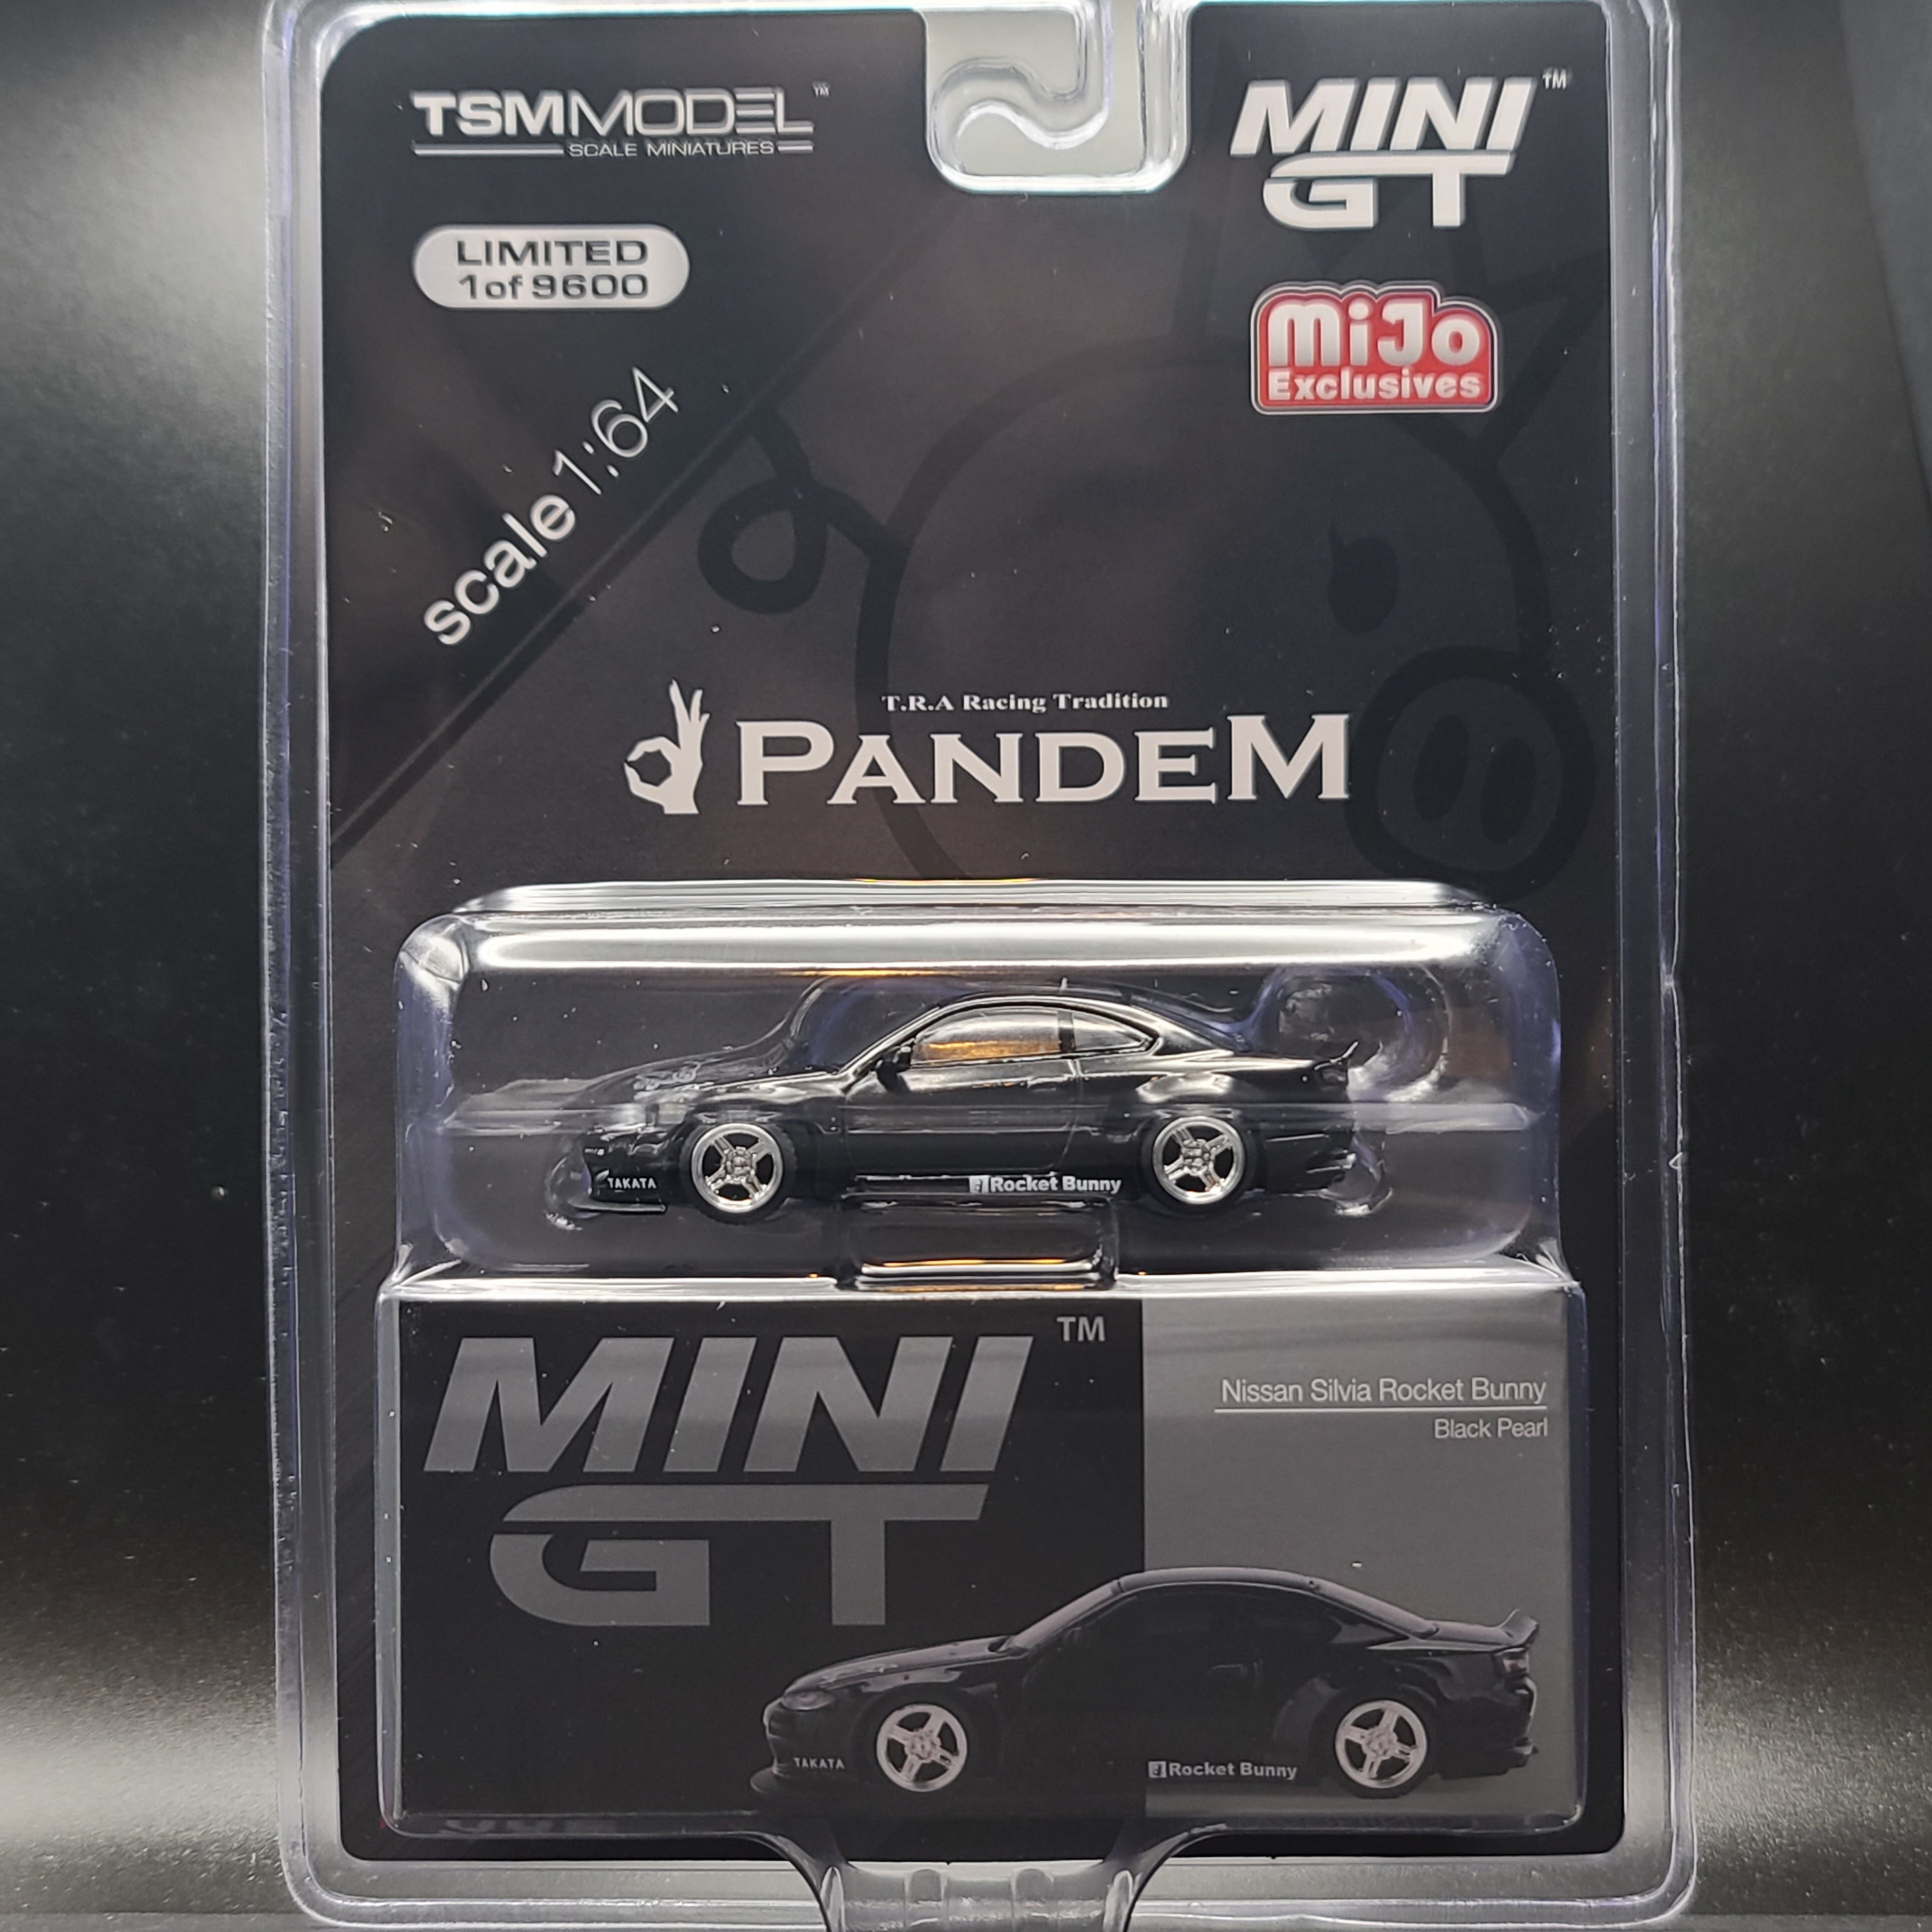 Mini GT Nissan Silvia S15 Rocket Bunny - 1:64 scale, black pearl (2024 MIJO Exclusives - Limited Edition 1 of 9600)